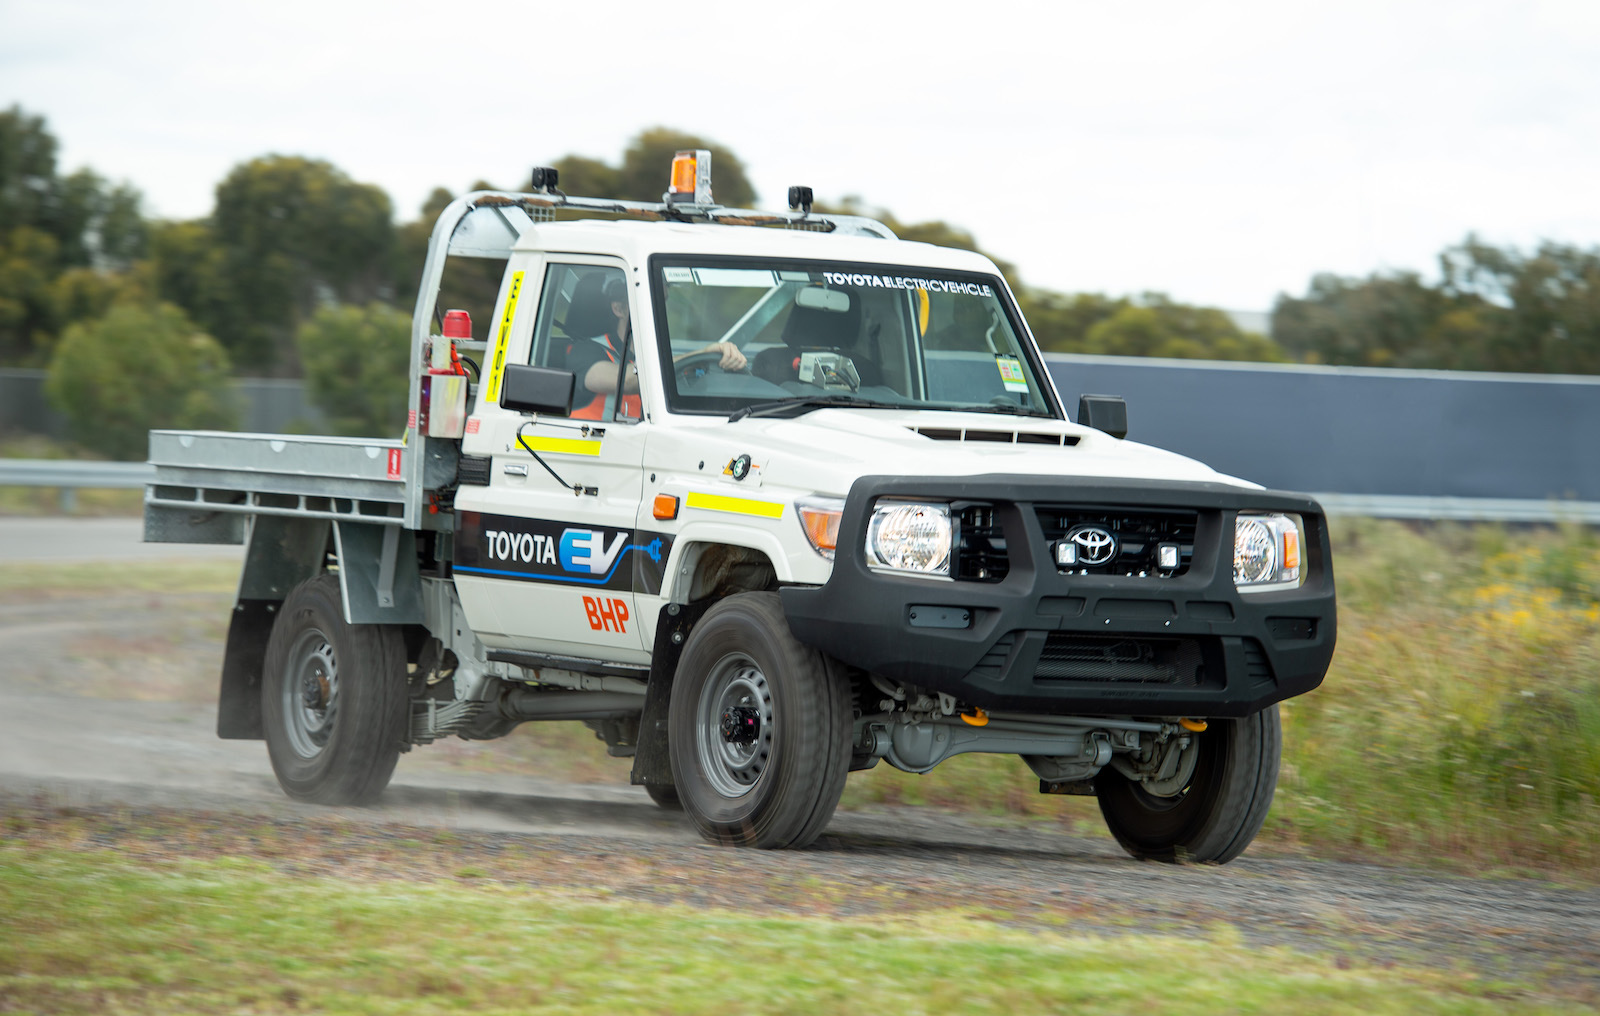 Electric Toyota LandCruiser 70 Series built for BHP mining